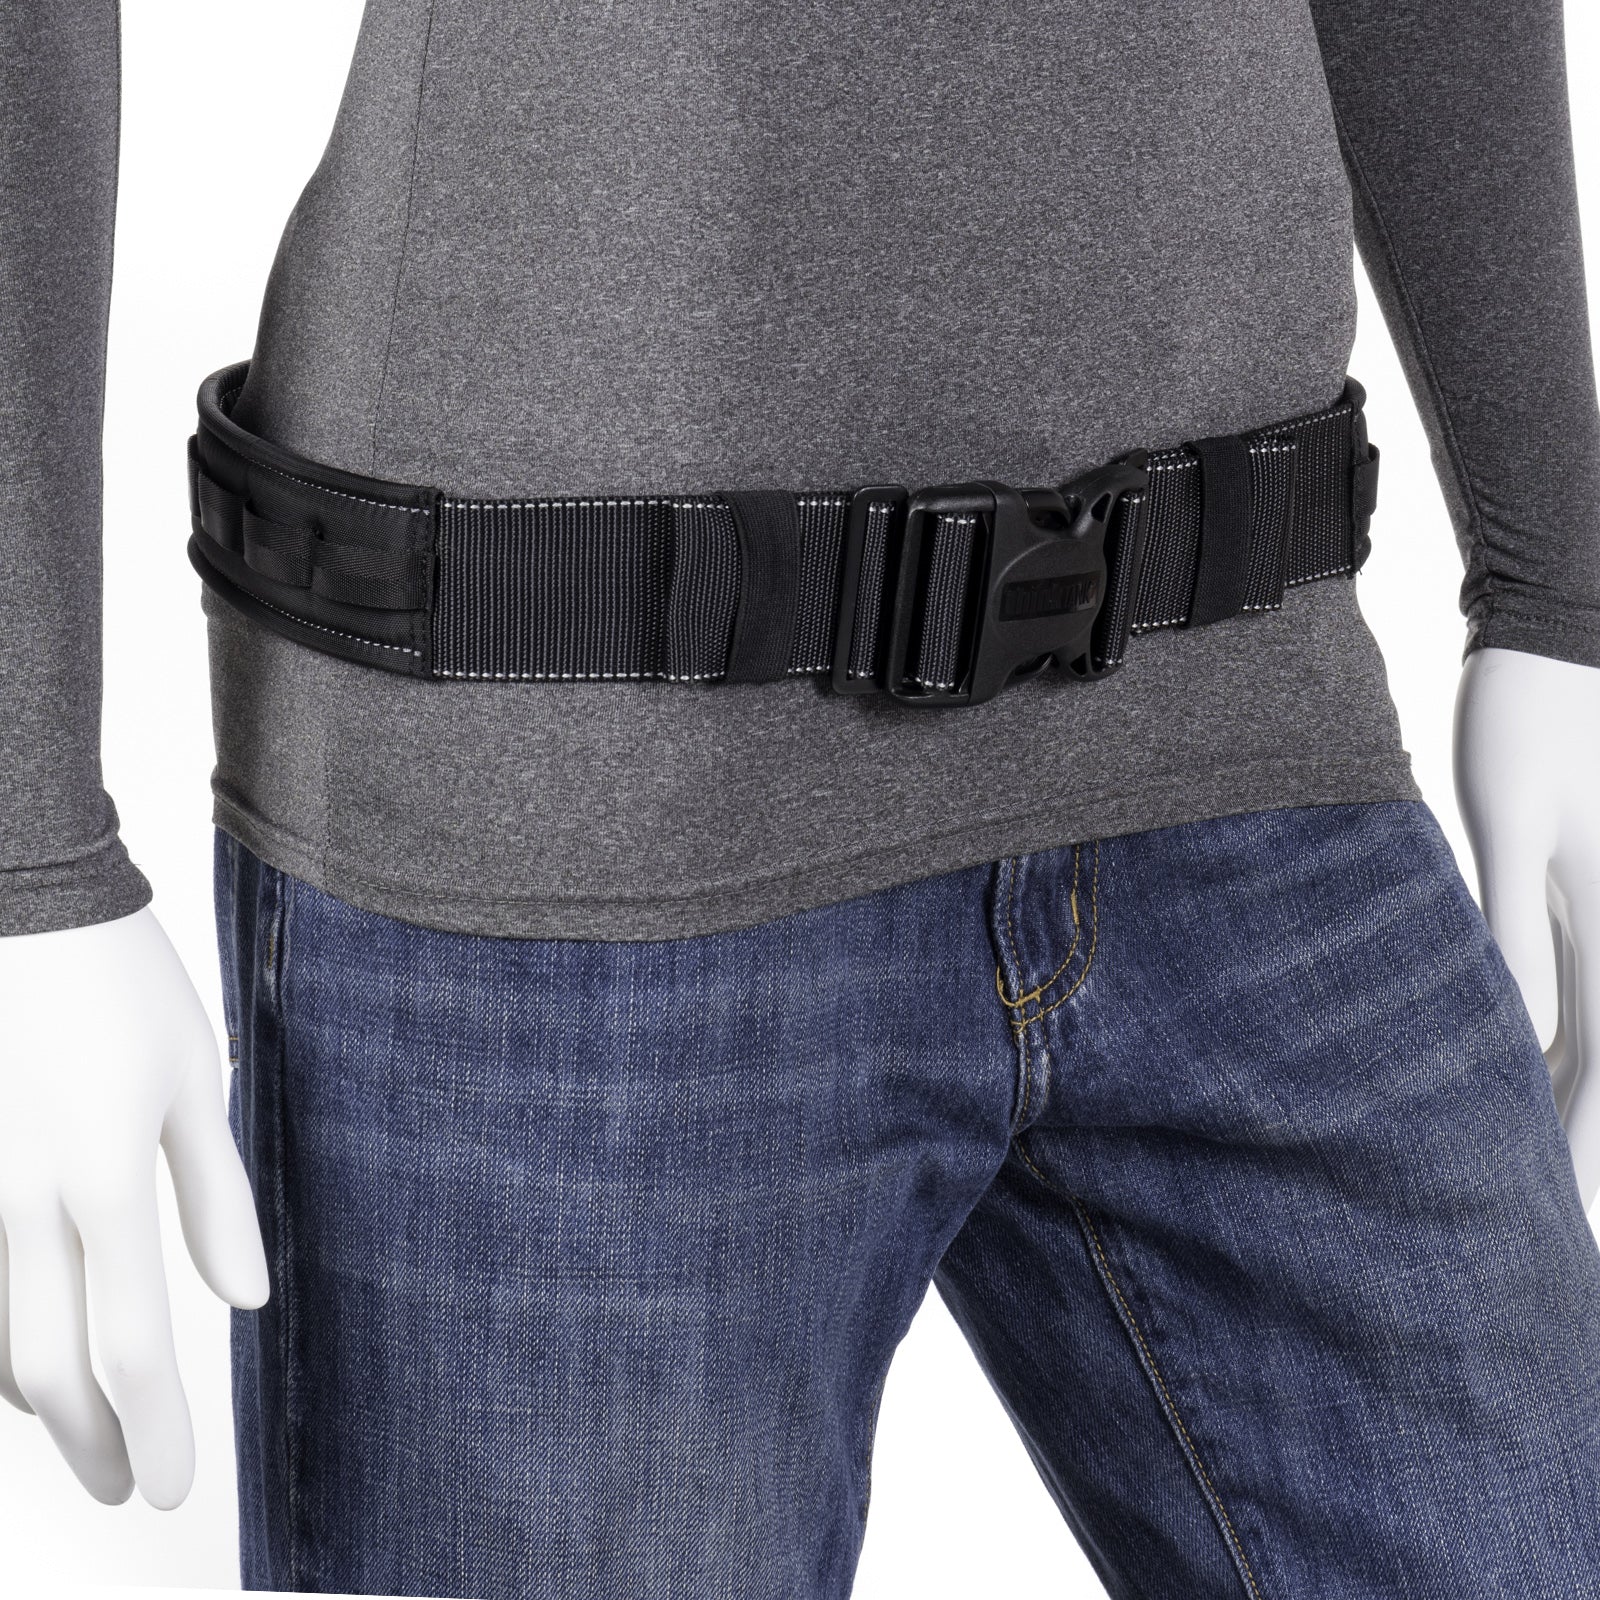 Thin belt with robust support for attaching modular components.